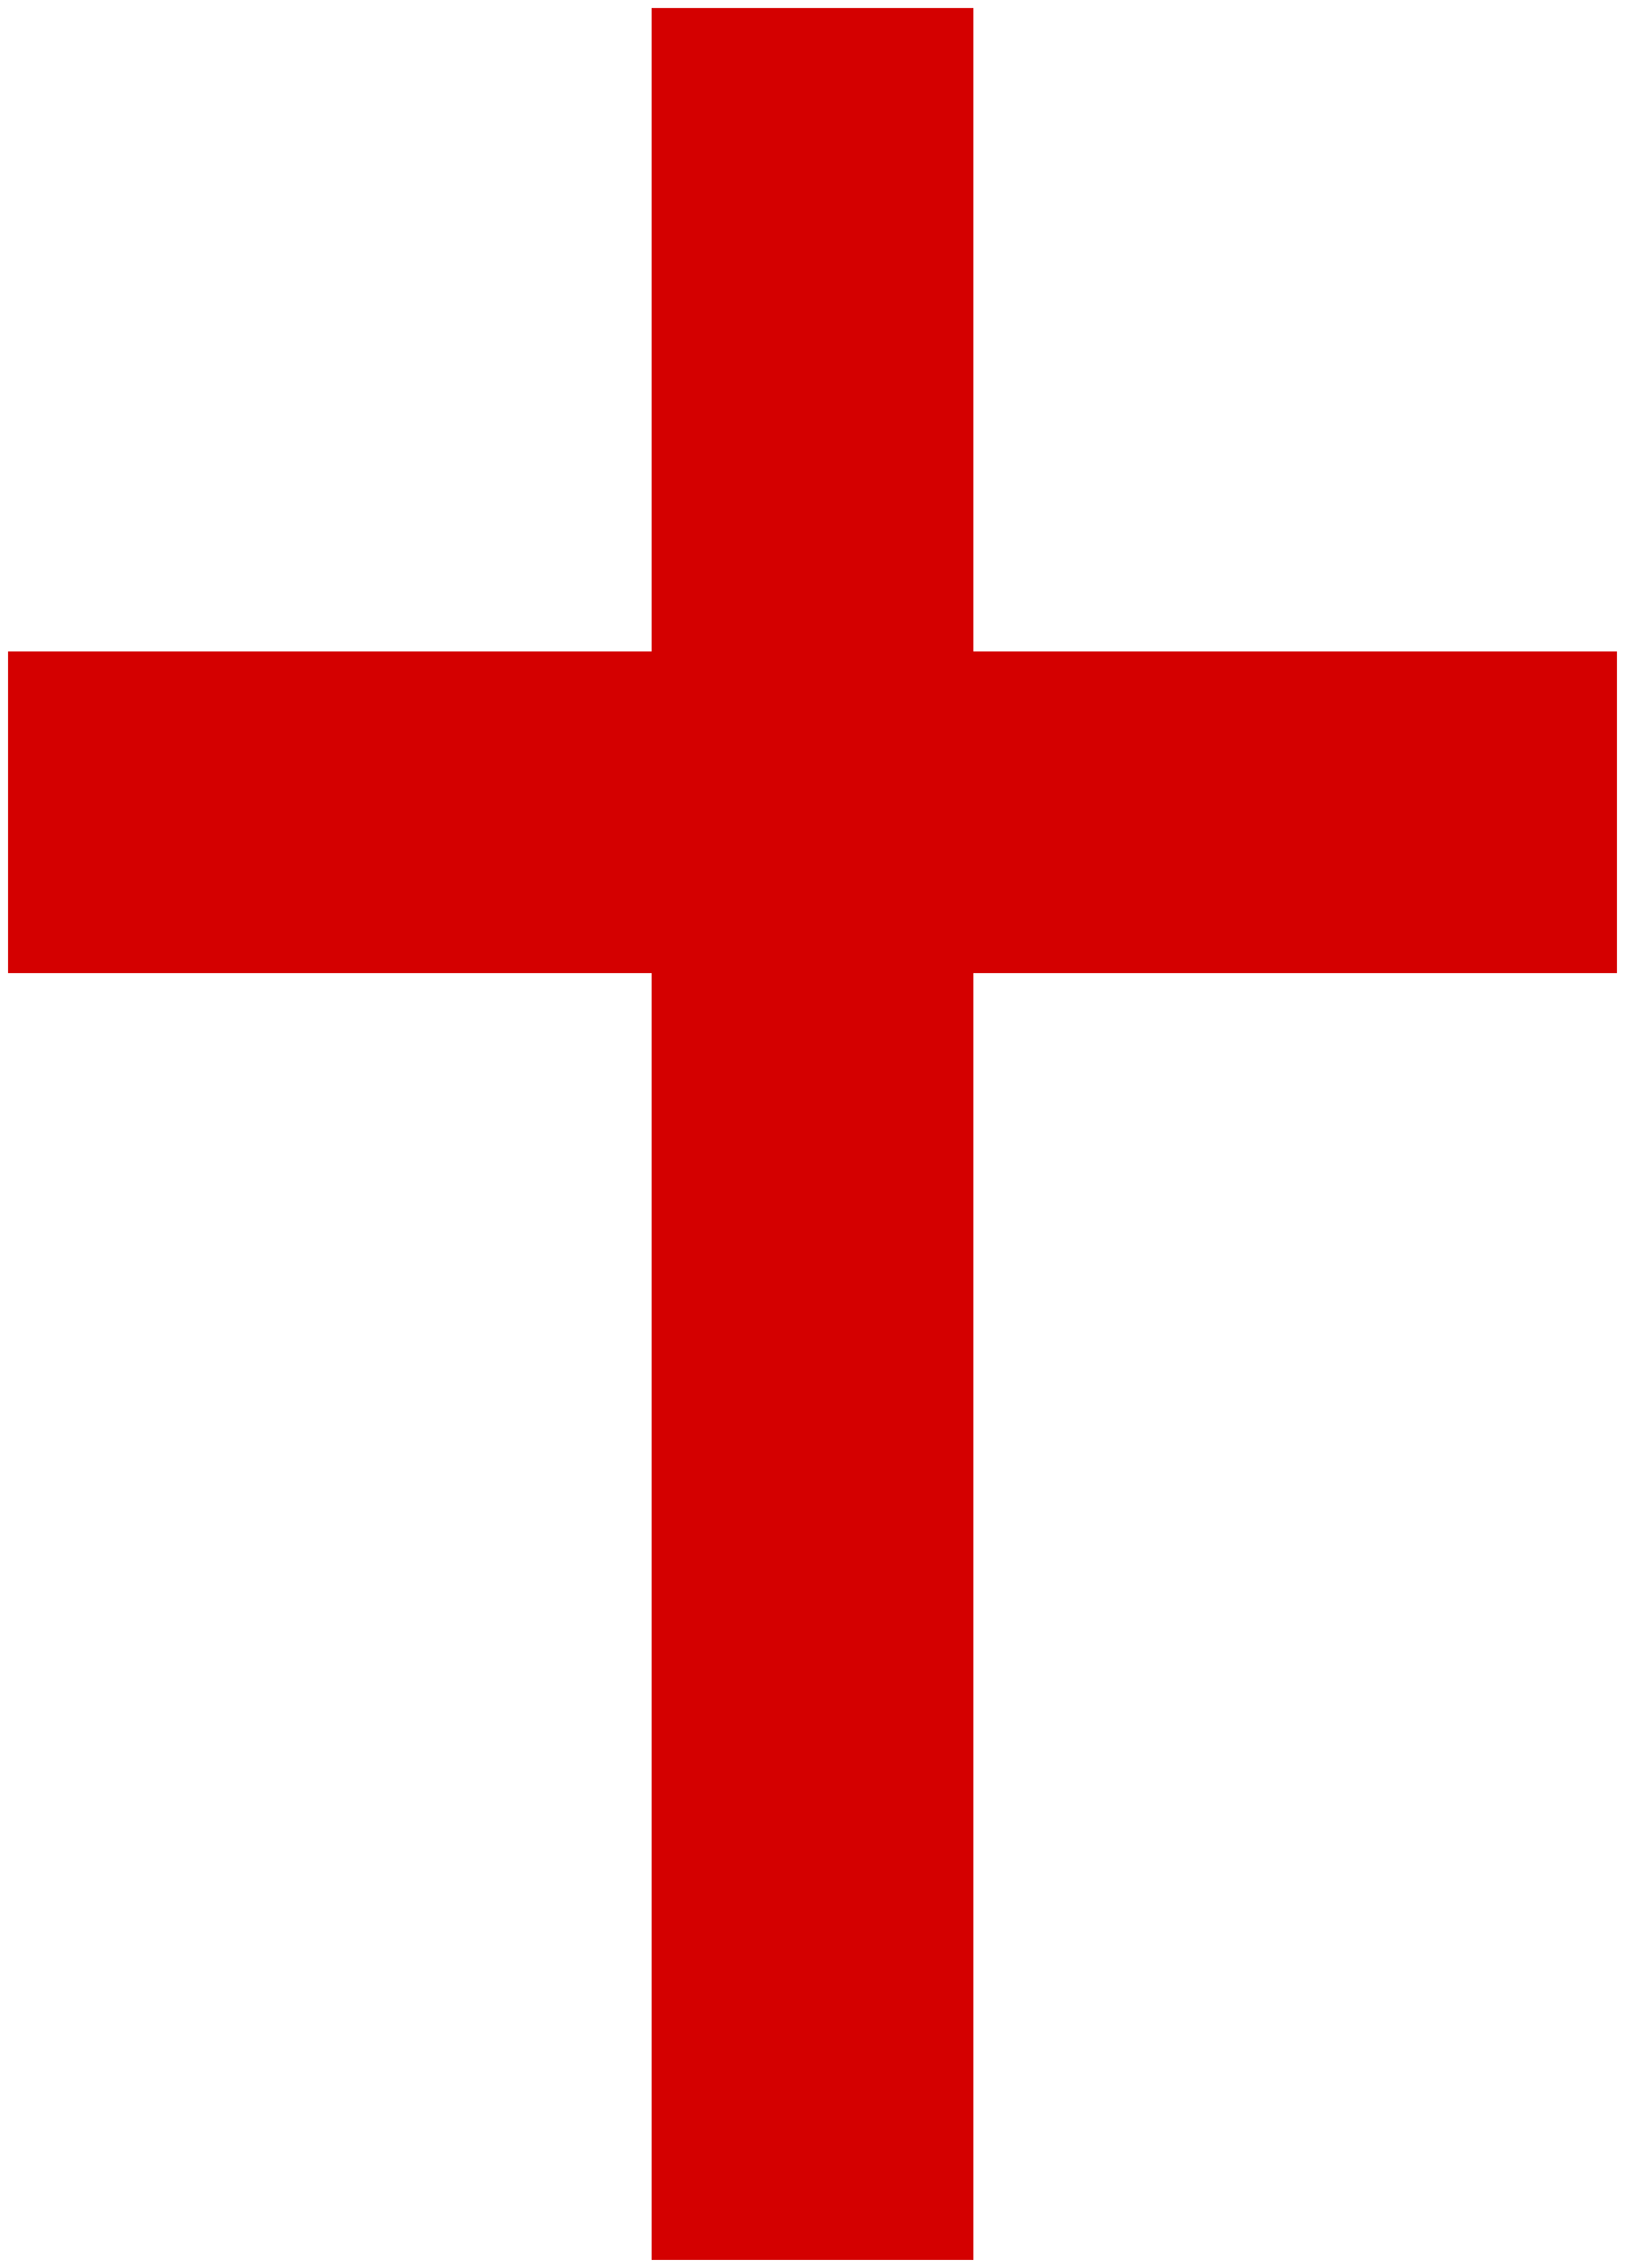 File:Christian cross (red) - Wikimedia Commons